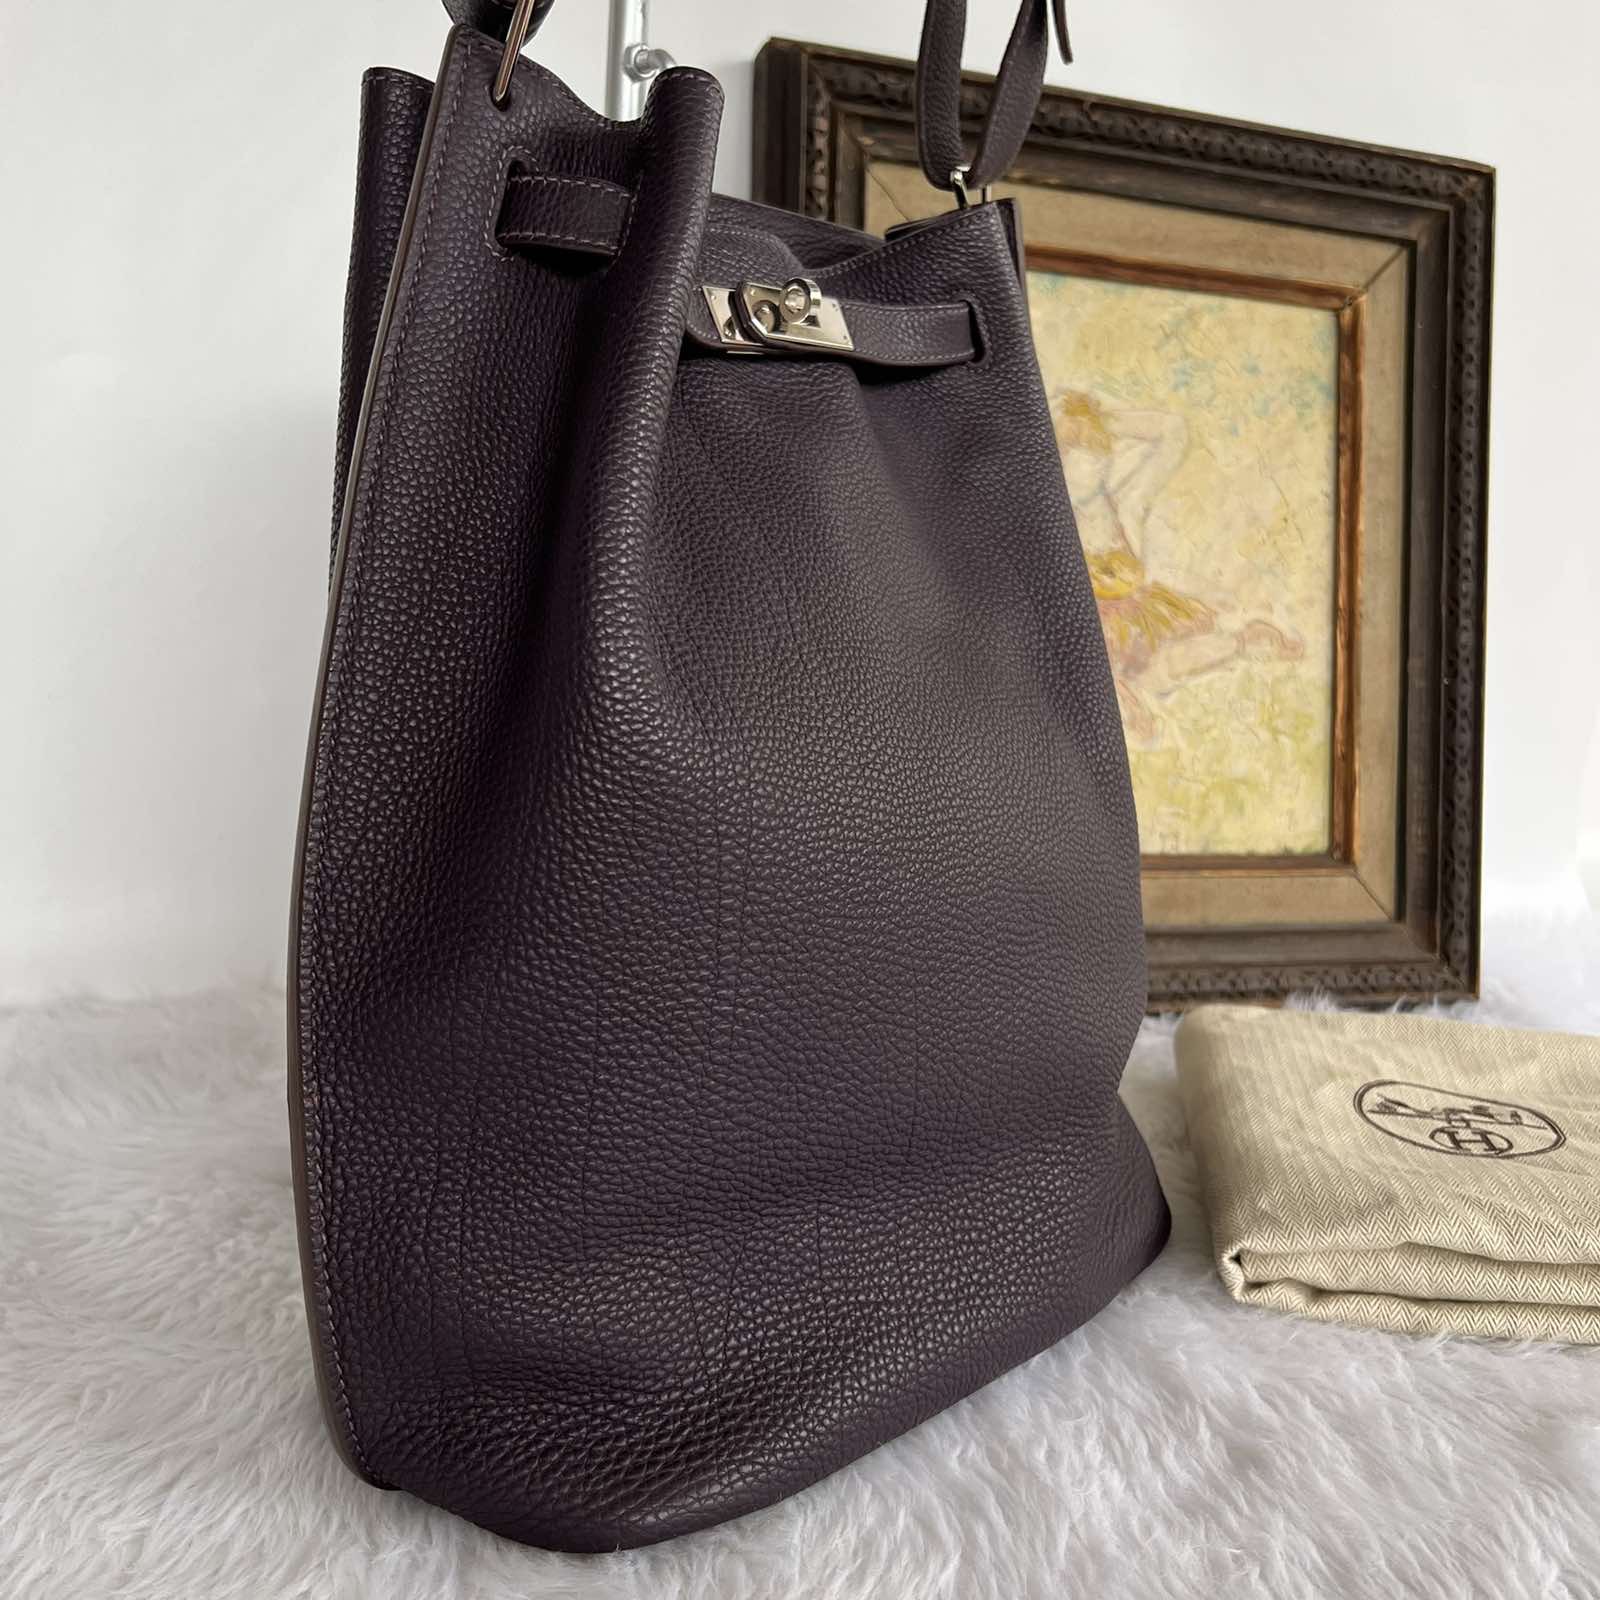 Hermes So Kelly 26 Taurillon Clemence Tote Bag Black - DDH